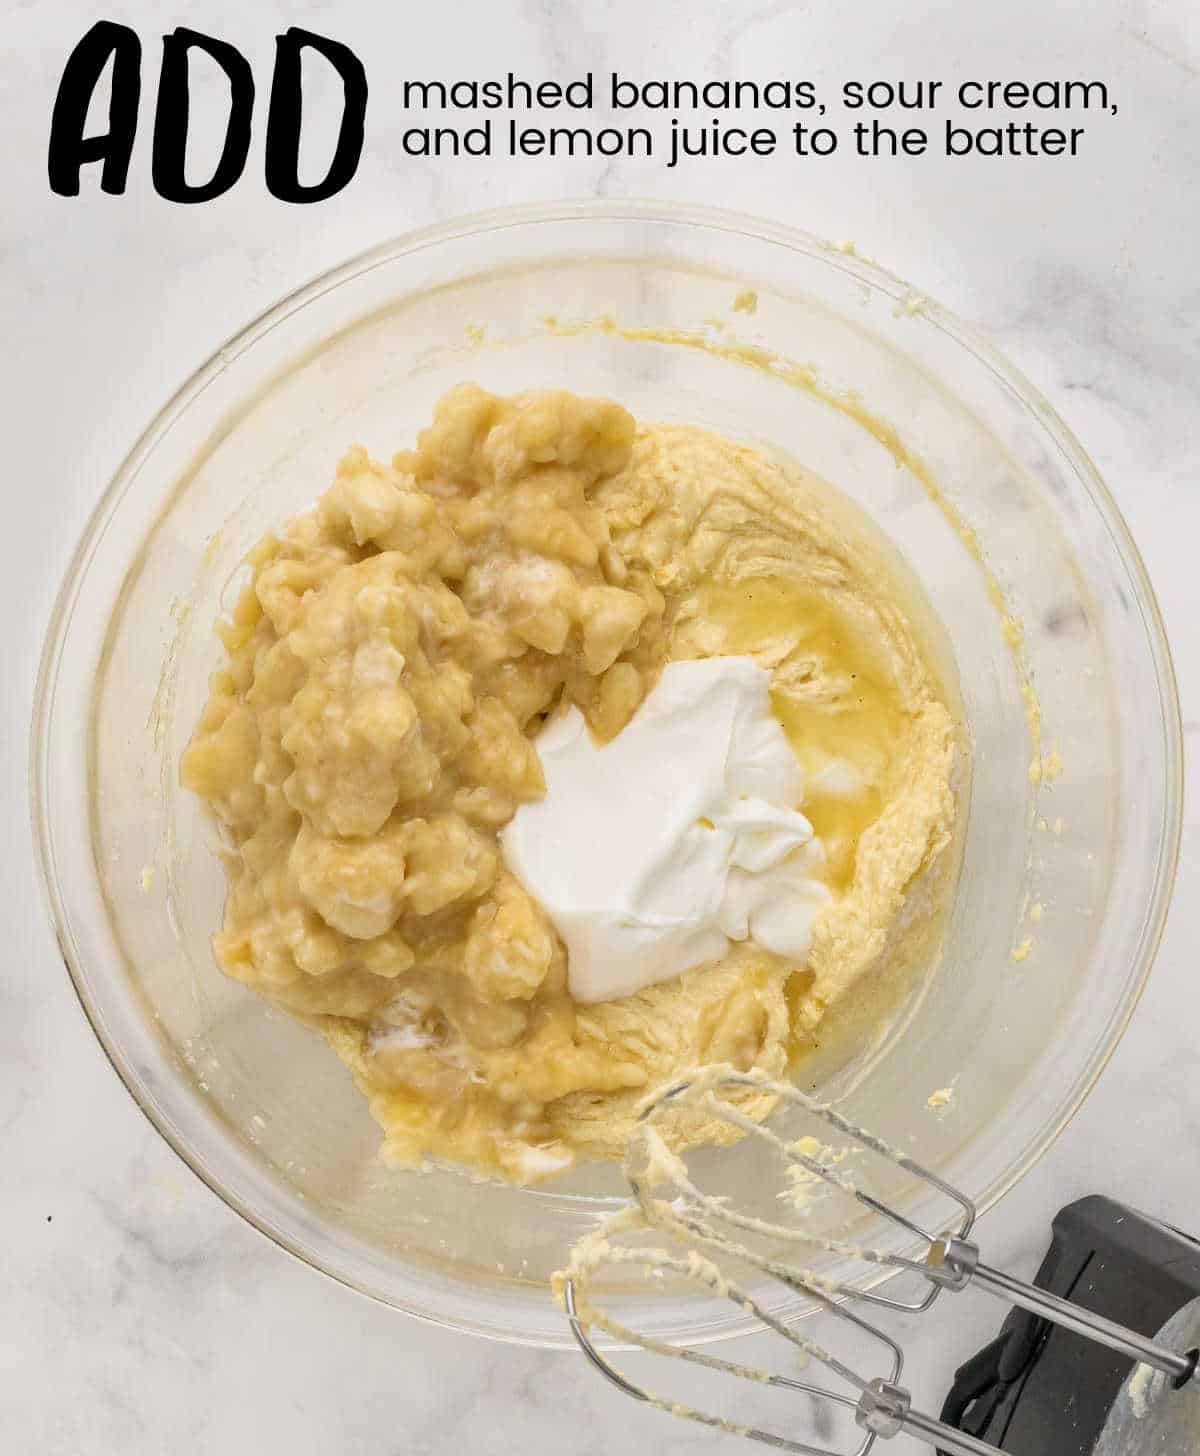 adding mashed bananas and sour cream to the batter